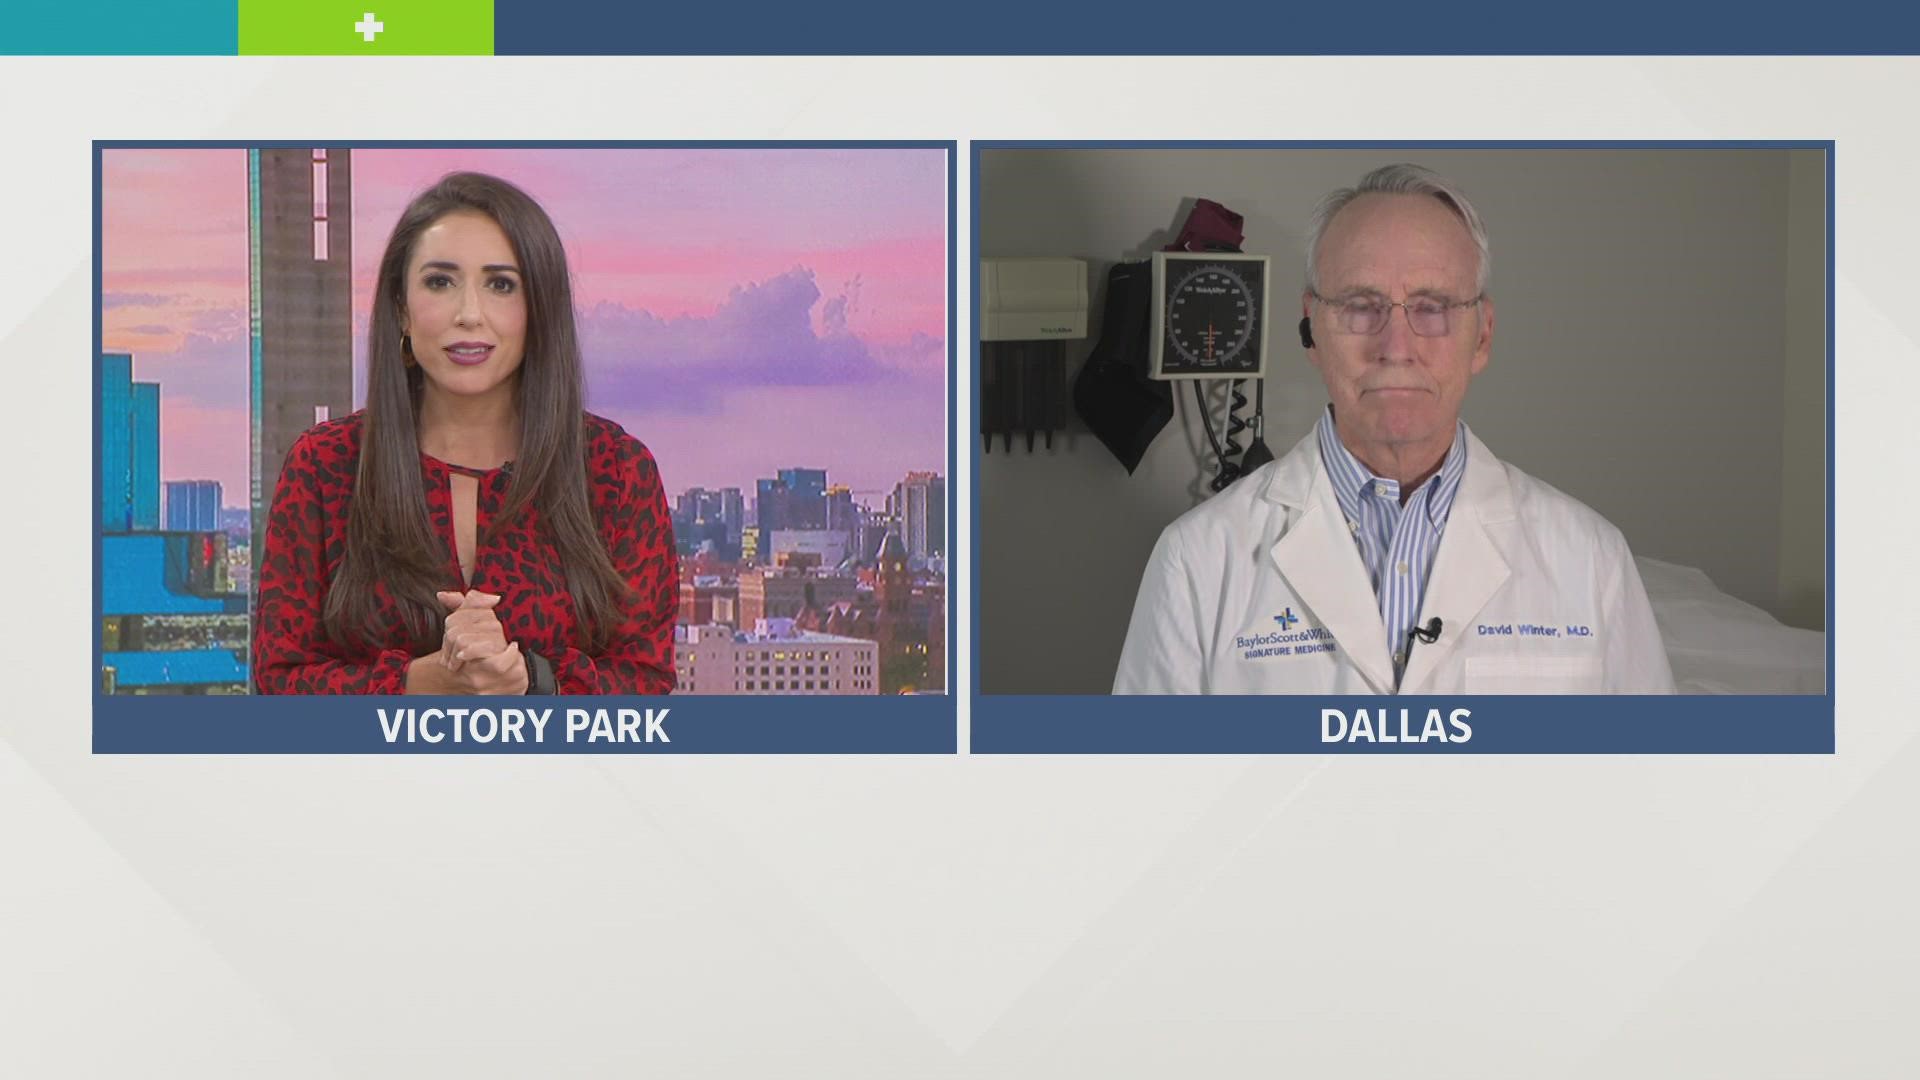 Dr. David Winter with Baylor Scott & White is here to discuss the latest vaccine news and what you need to know.